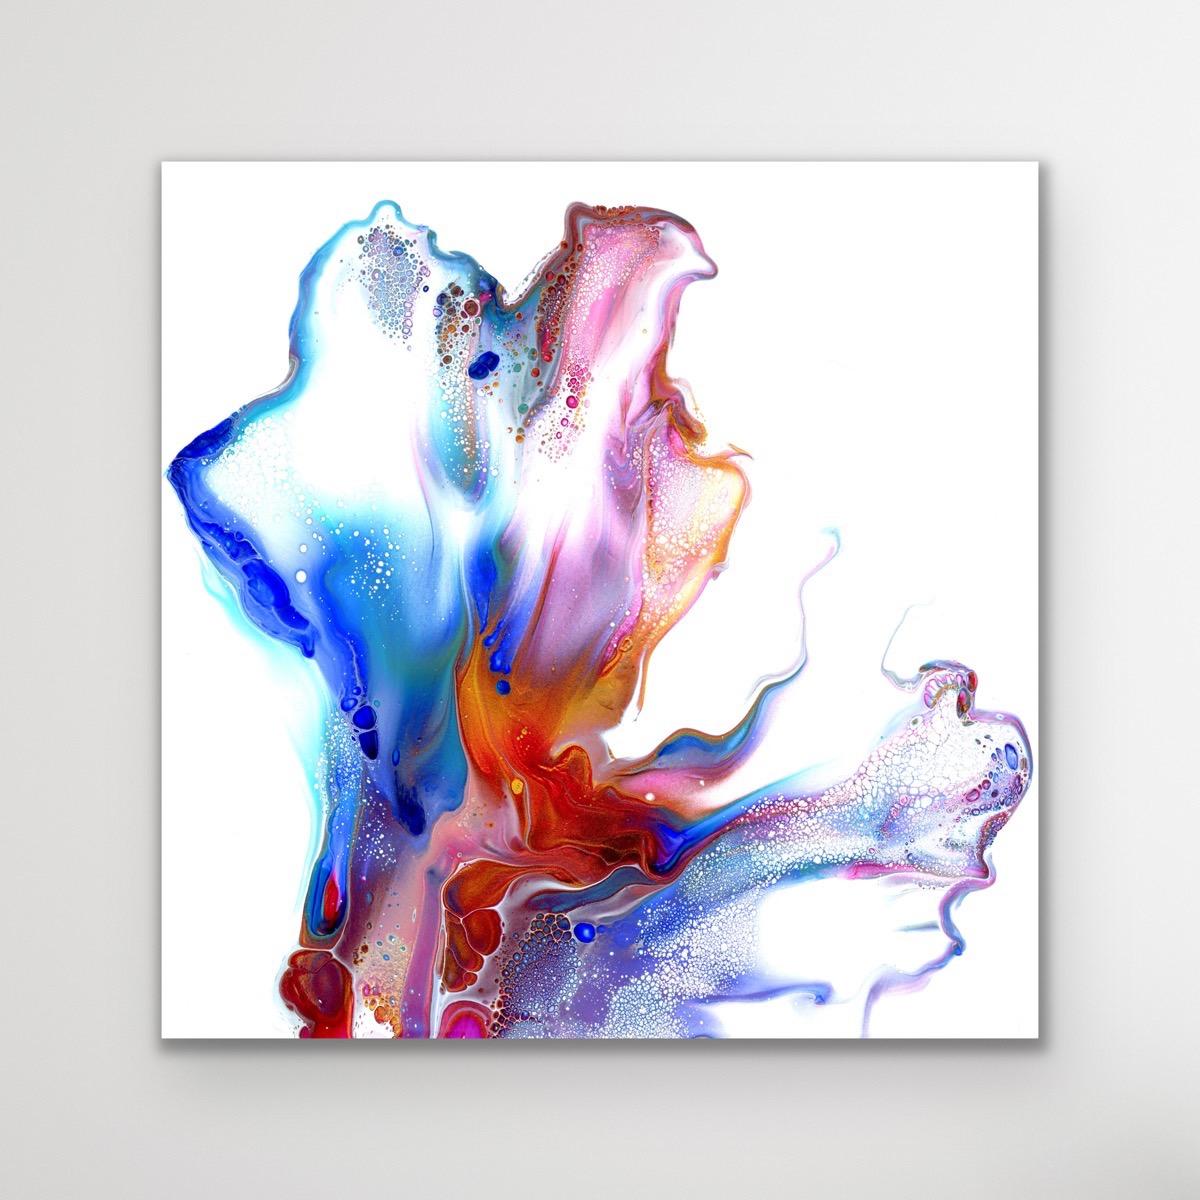 Contemporary Modern Abstract Fluid Art Giclee Print, LE Signed by Celeste Reiter